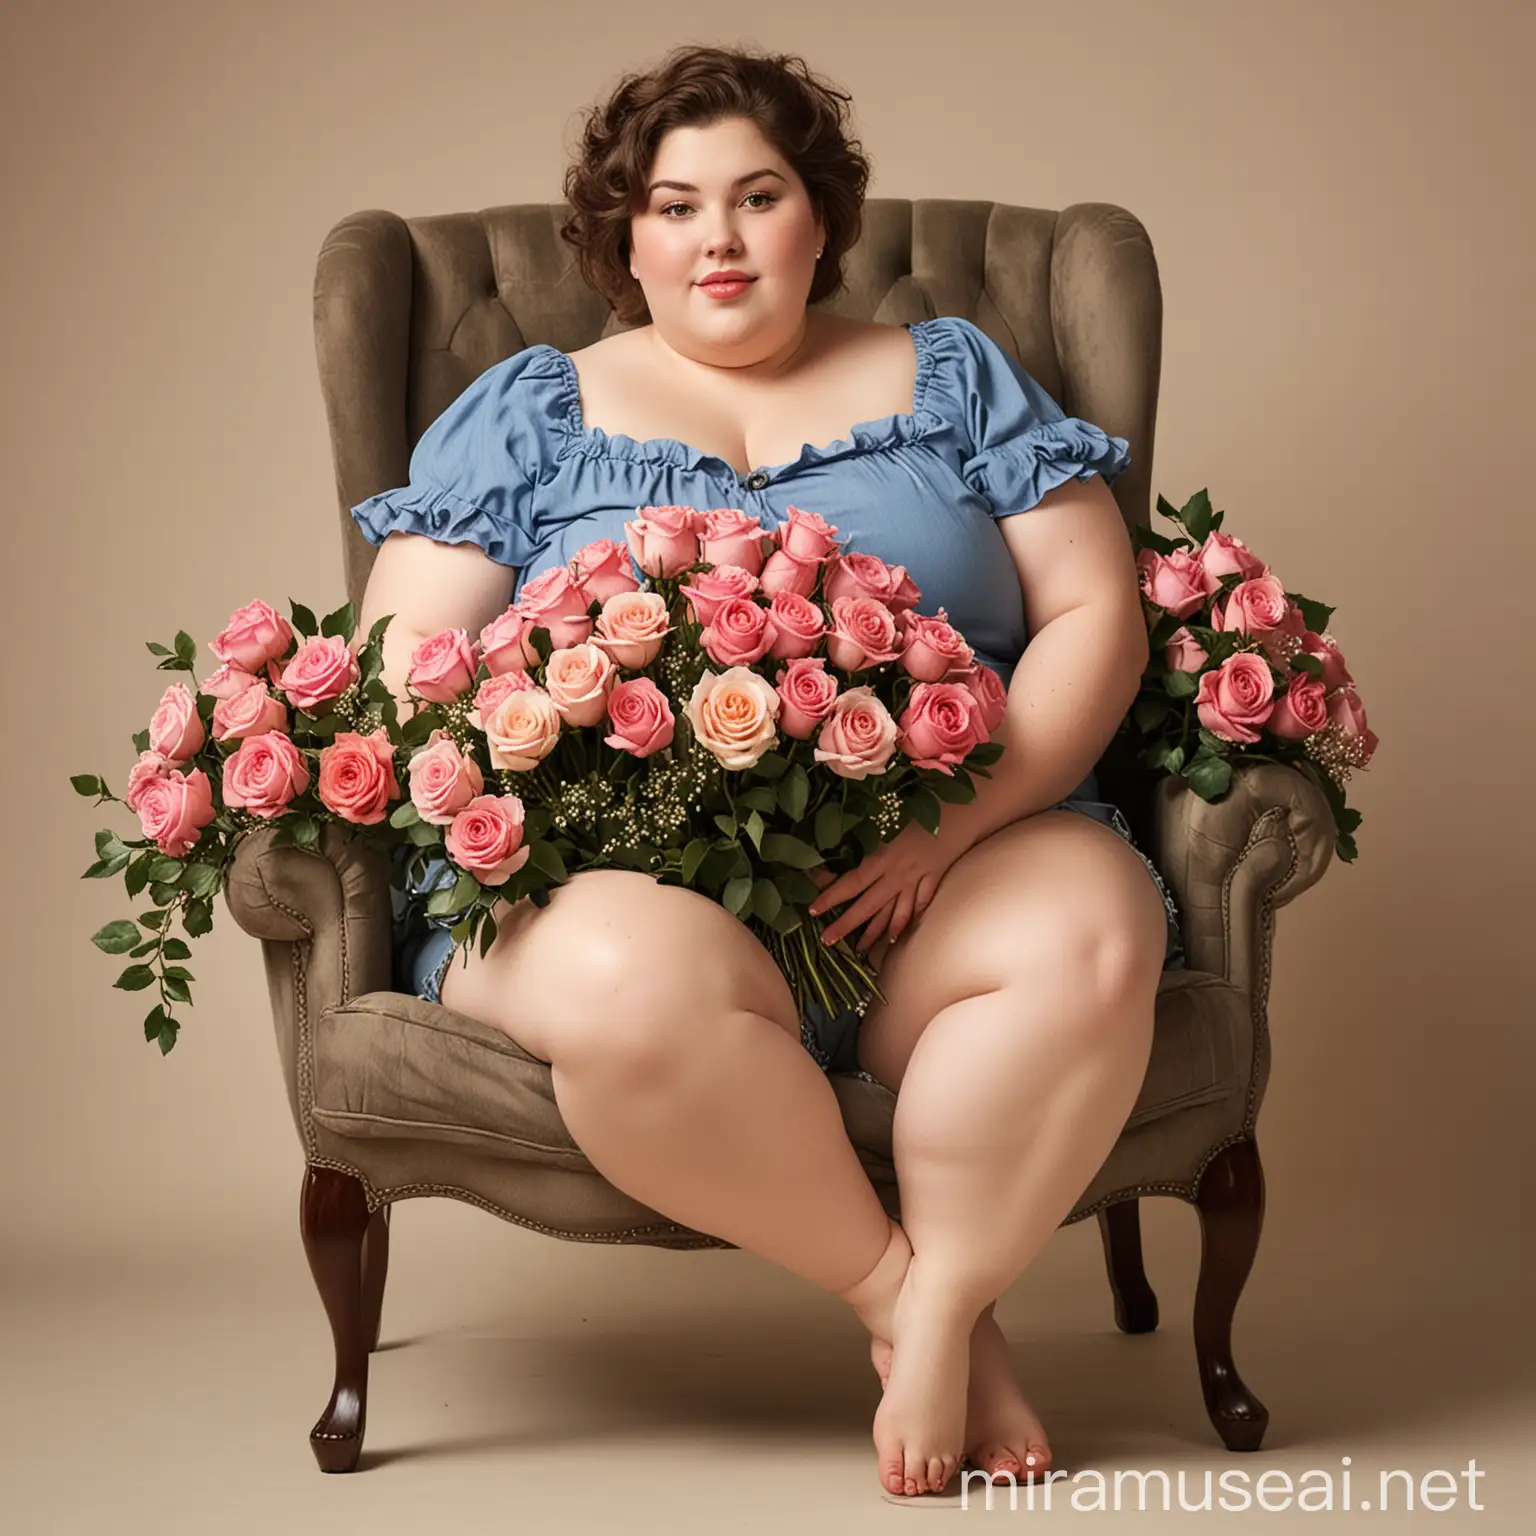 Chubby Woman Sitting with Roses Bouquet